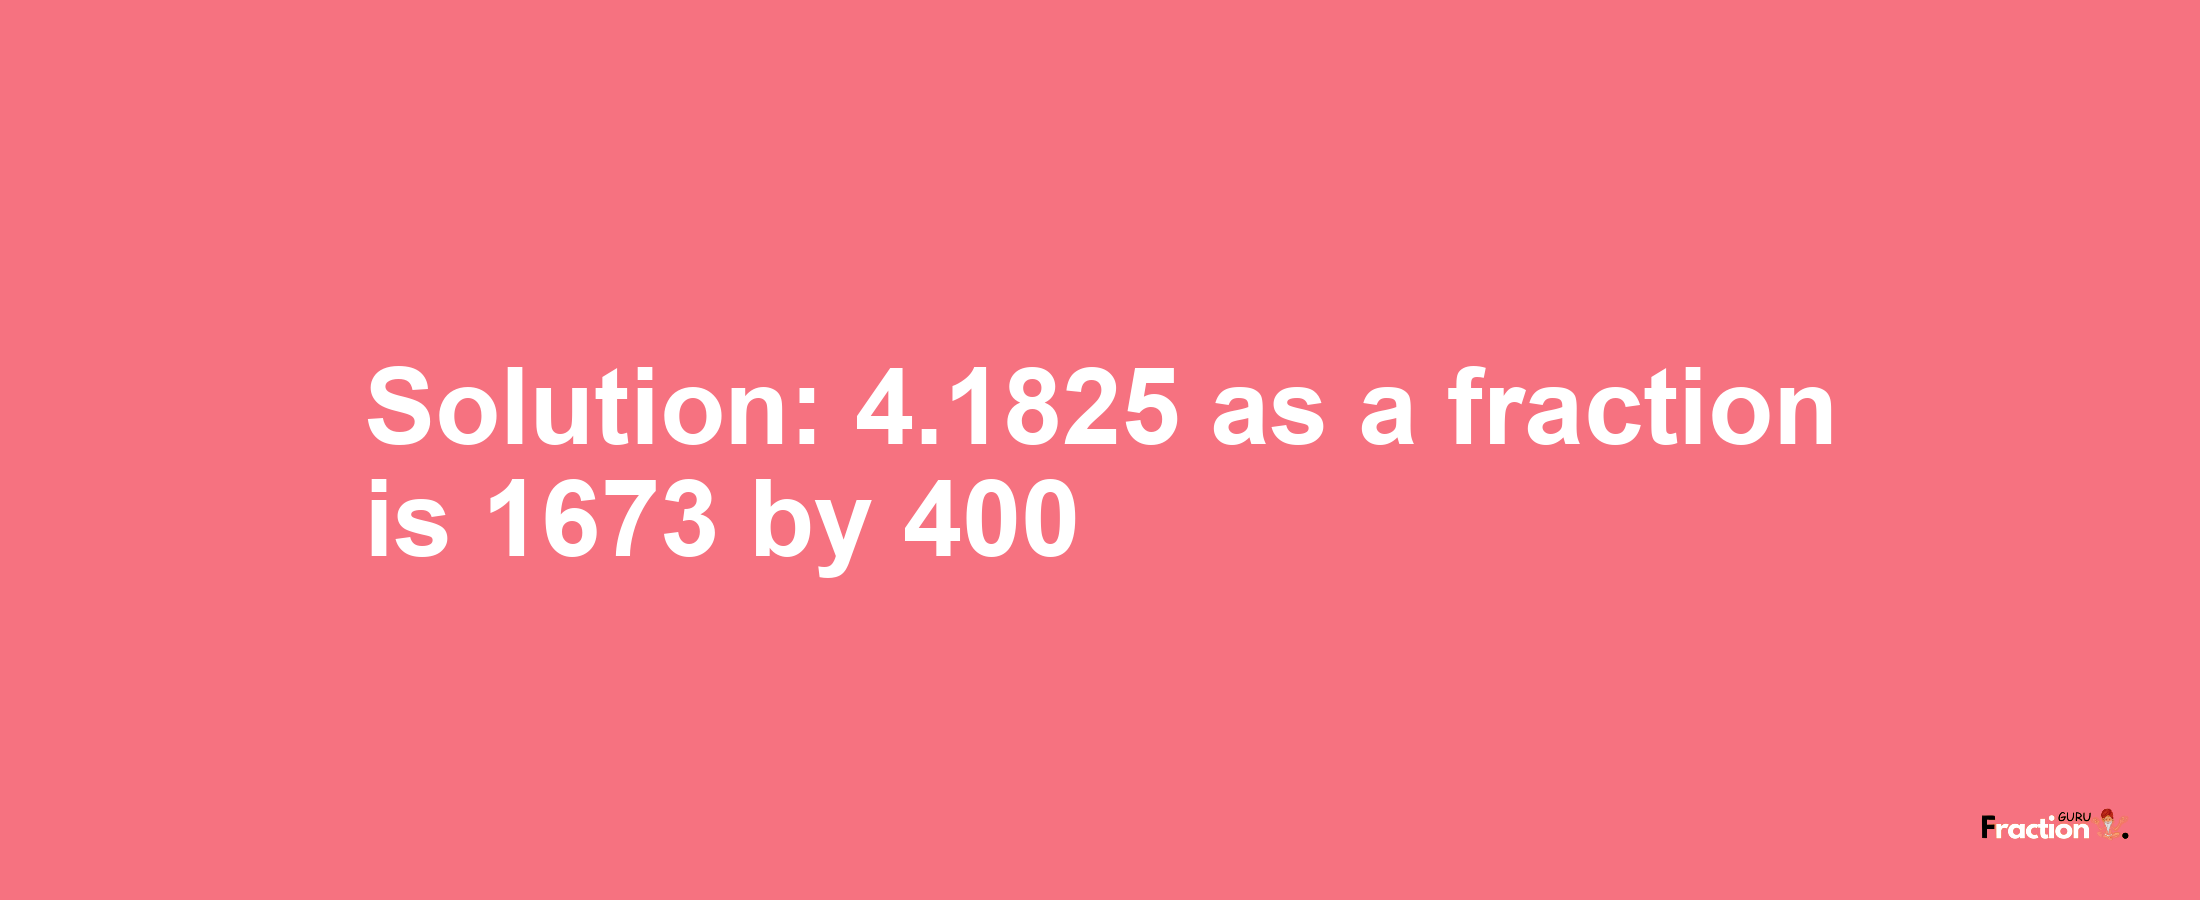 Solution:4.1825 as a fraction is 1673/400